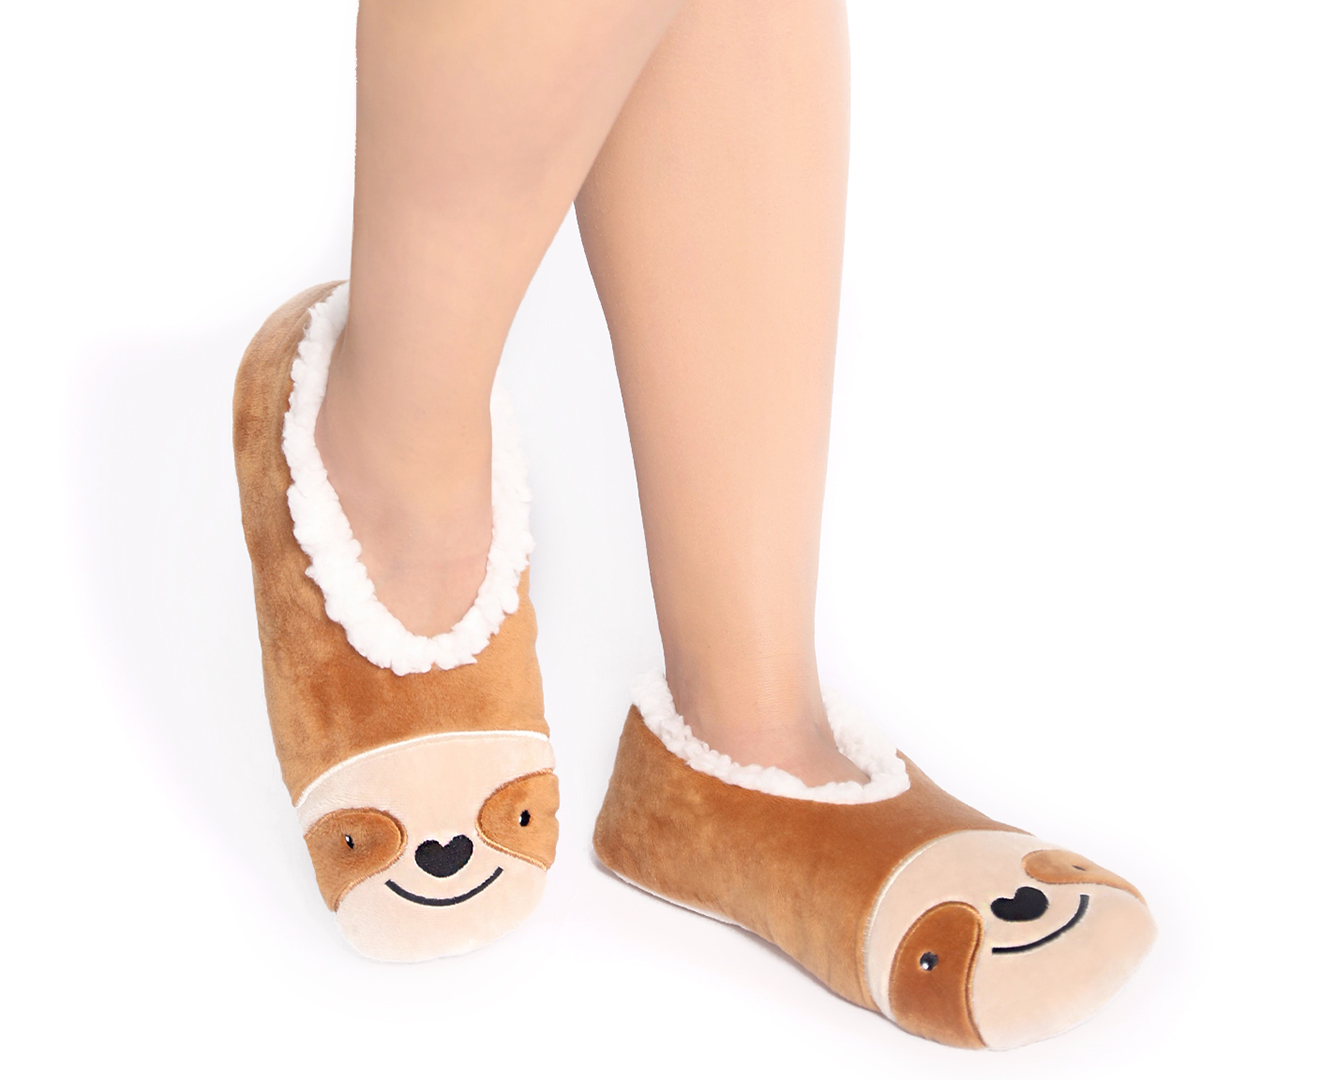 Snuggups Women's Animal Sloth Slippers - Brown .au